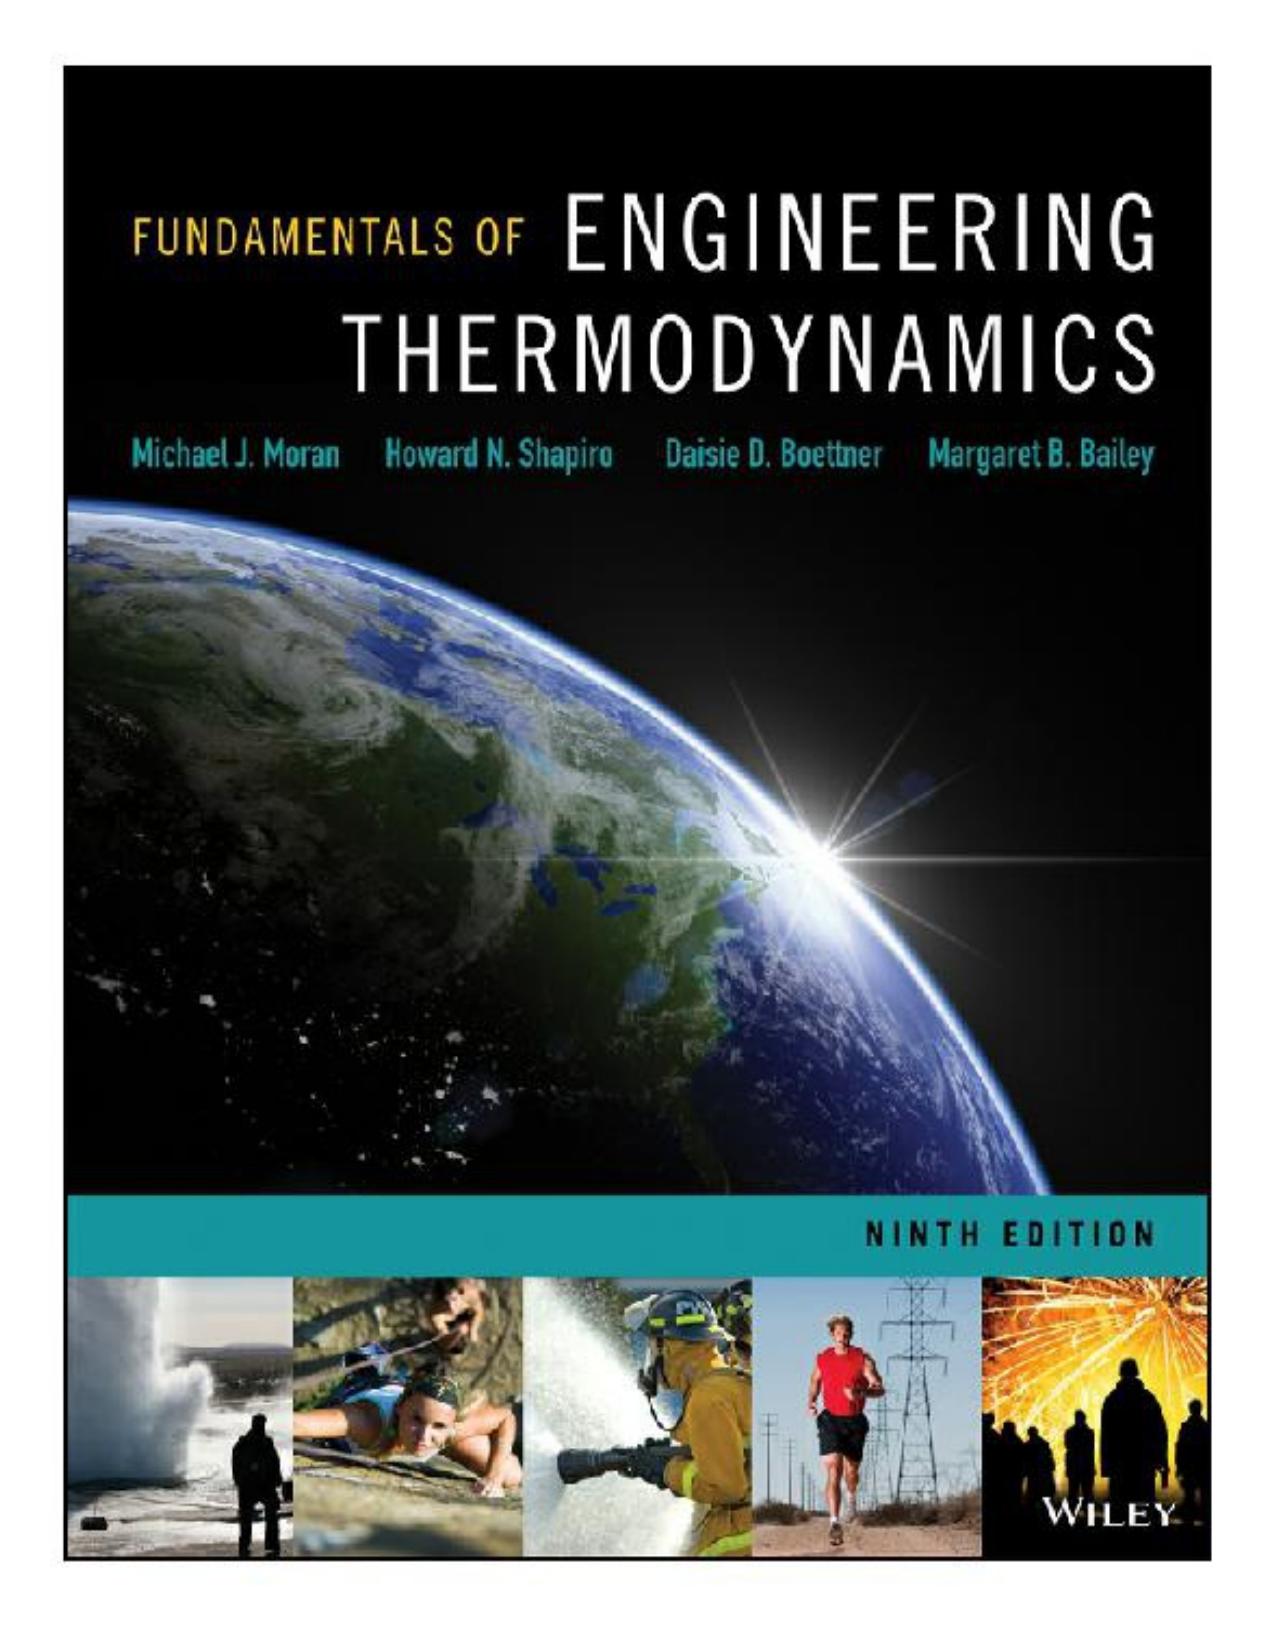 Fundamentals of Engineering Thermodynamics 9th Edition-Vitalsource Download.jpg